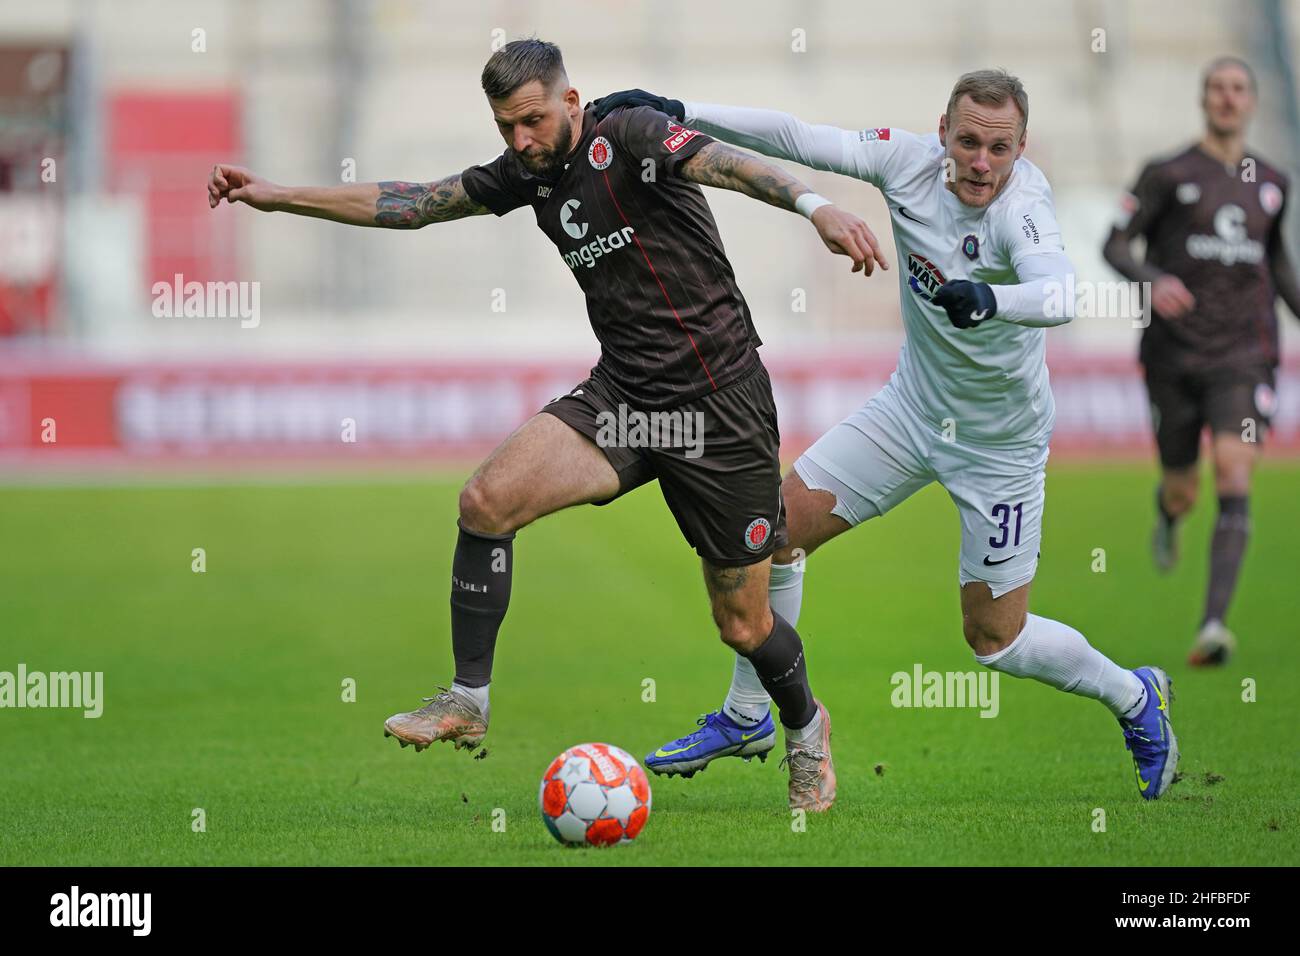 Hamburg, Germany. 15th Jan, 2022. Soccer: 2nd Bundesliga, Matchday 19, FC St. Pauli - Erzgebirge Aue, at Millerntor Stadium. St. Pauli's Guido Burgstaller (l) and Aue's Ben Zolinski. Credit: Marcus Brandt/dpa - IMPORTANT NOTE: In accordance with the requirements of the DFL Deutsche Fußball Liga and the DFB Deutscher Fußball-Bund, it is prohibited to use or have used photographs taken in the stadium and/or of the match in the form of sequence pictures and/or video-like photo series./dpa/Alamy Live News Stock Photo